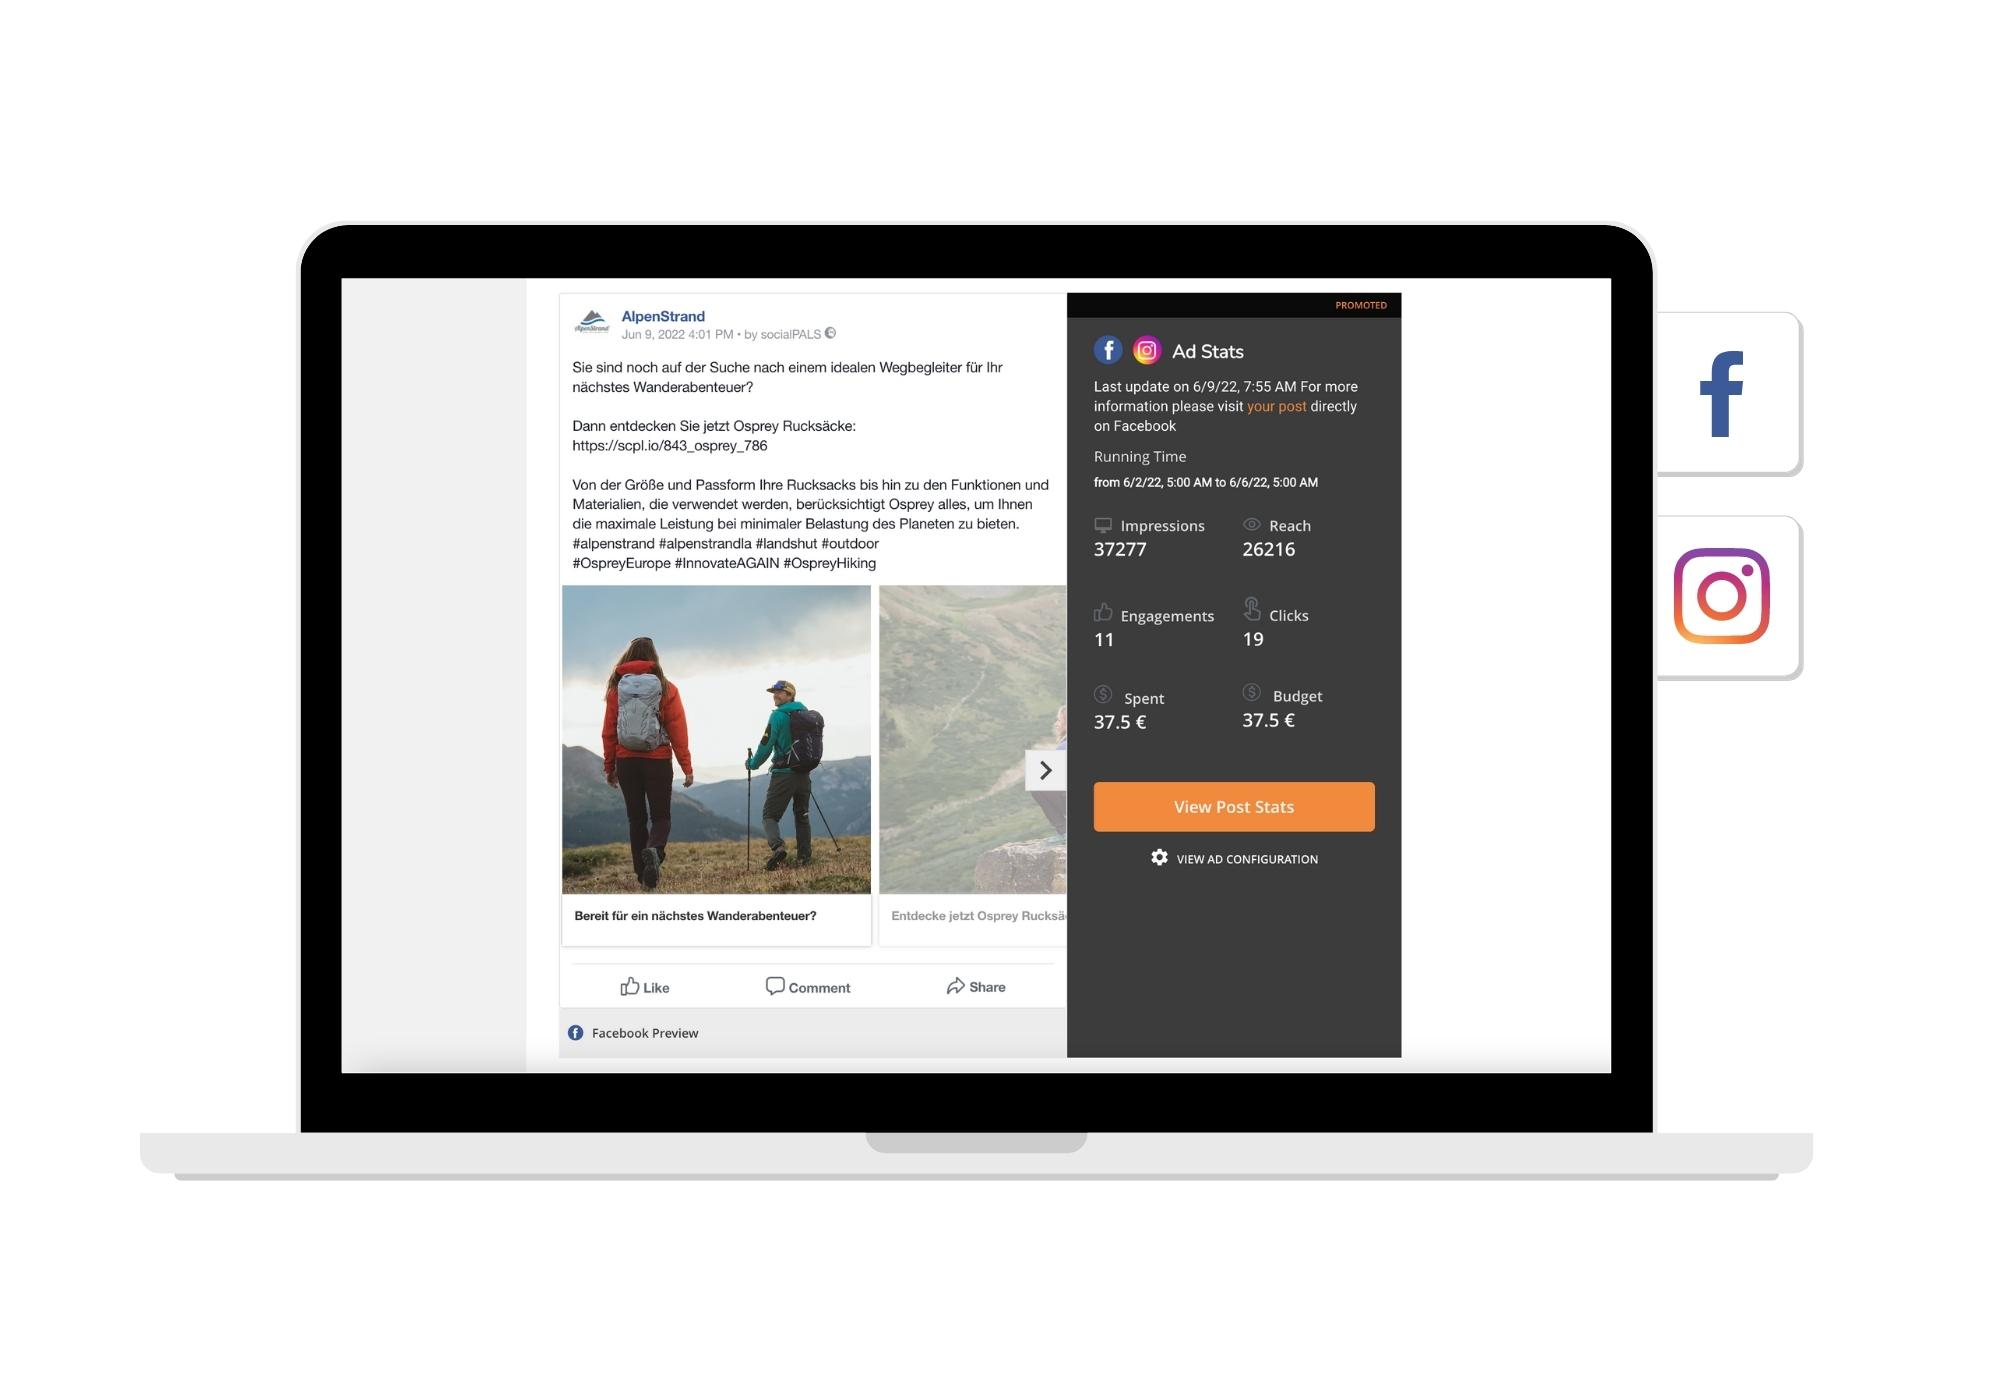 Within the socialPALS dashboard, brands and merchants will find clear reporting for all ads placed.